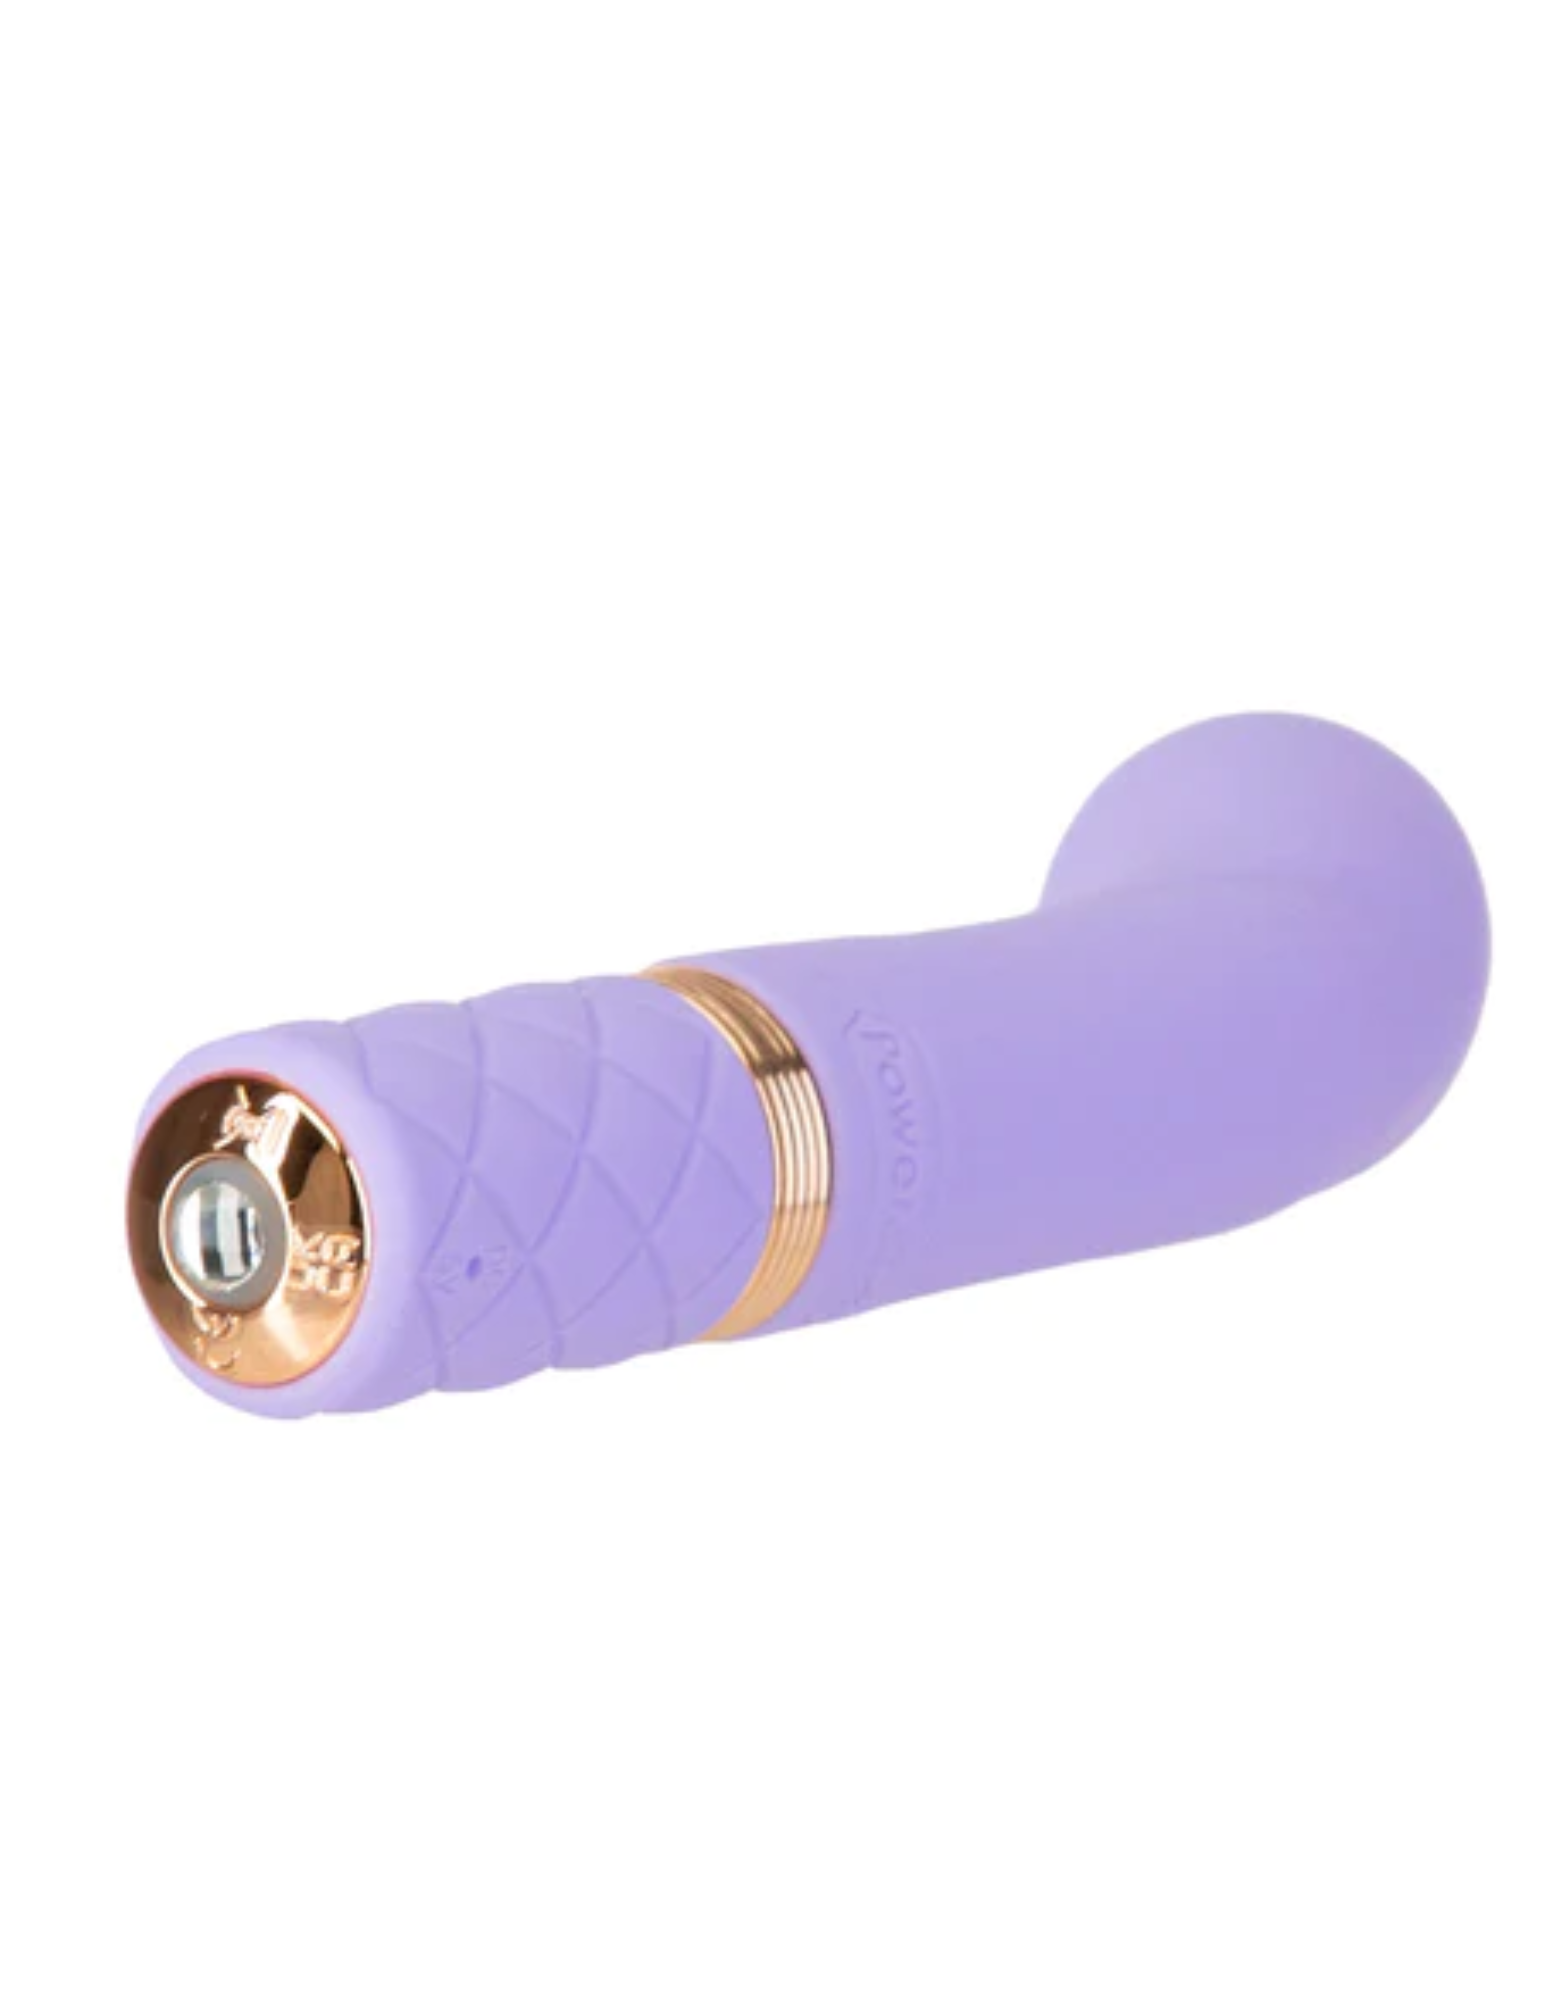 Back angle view of the Pillow Talk Racy bullet from BMS Factory (purple) shows its G-spot curve and small size, as well as its hidden charging port.